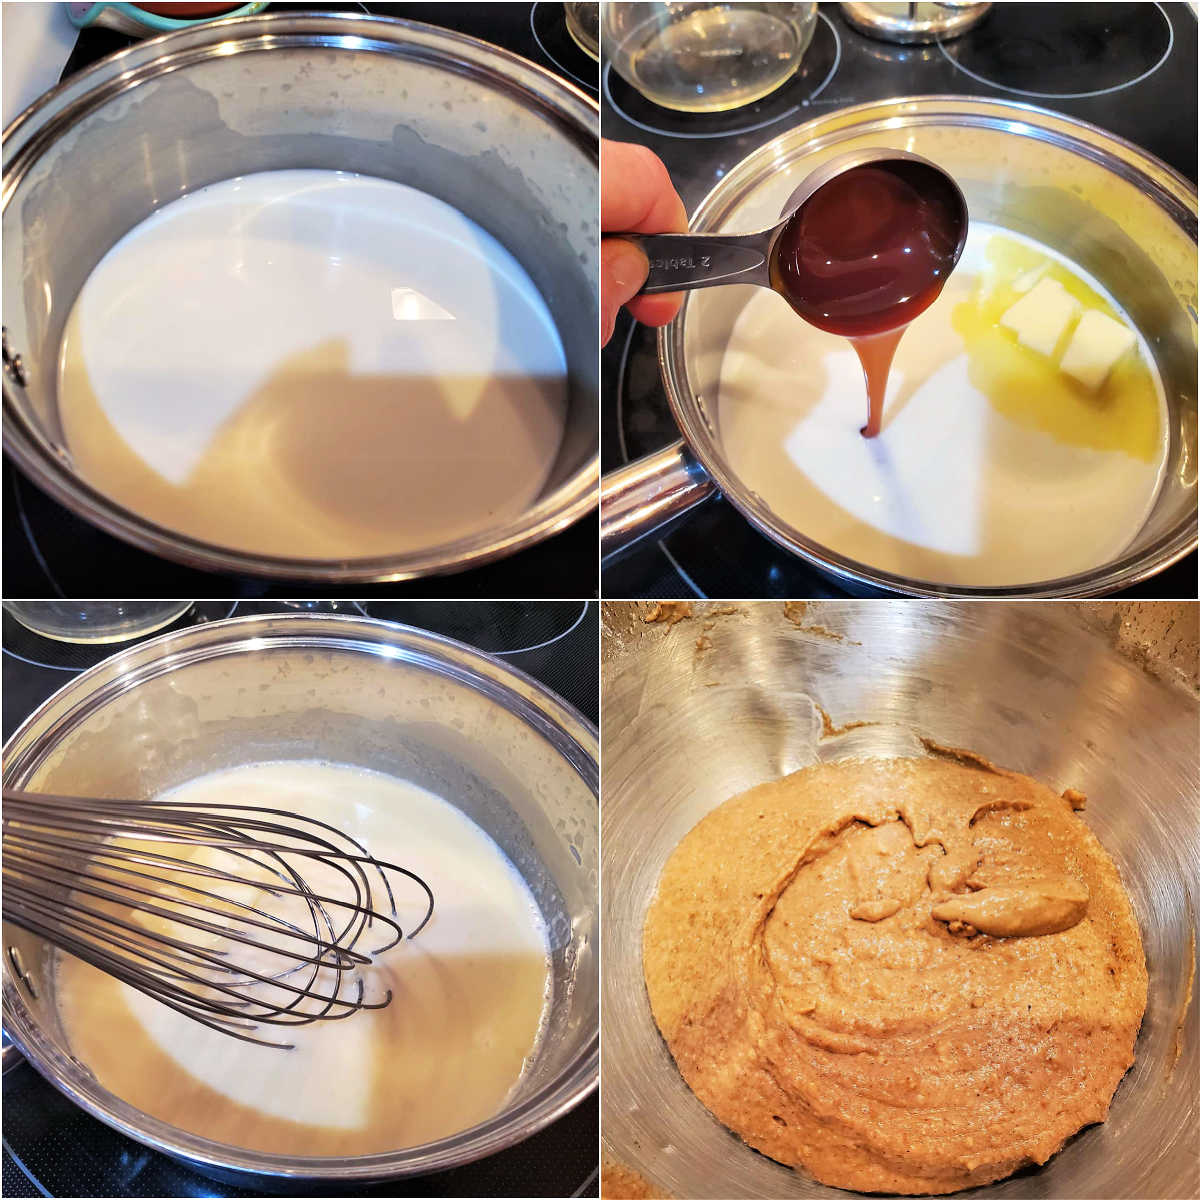 A collage of 4 images showing how to scald milk, add butter and malt syrup, and mix up the sponge ingredients.